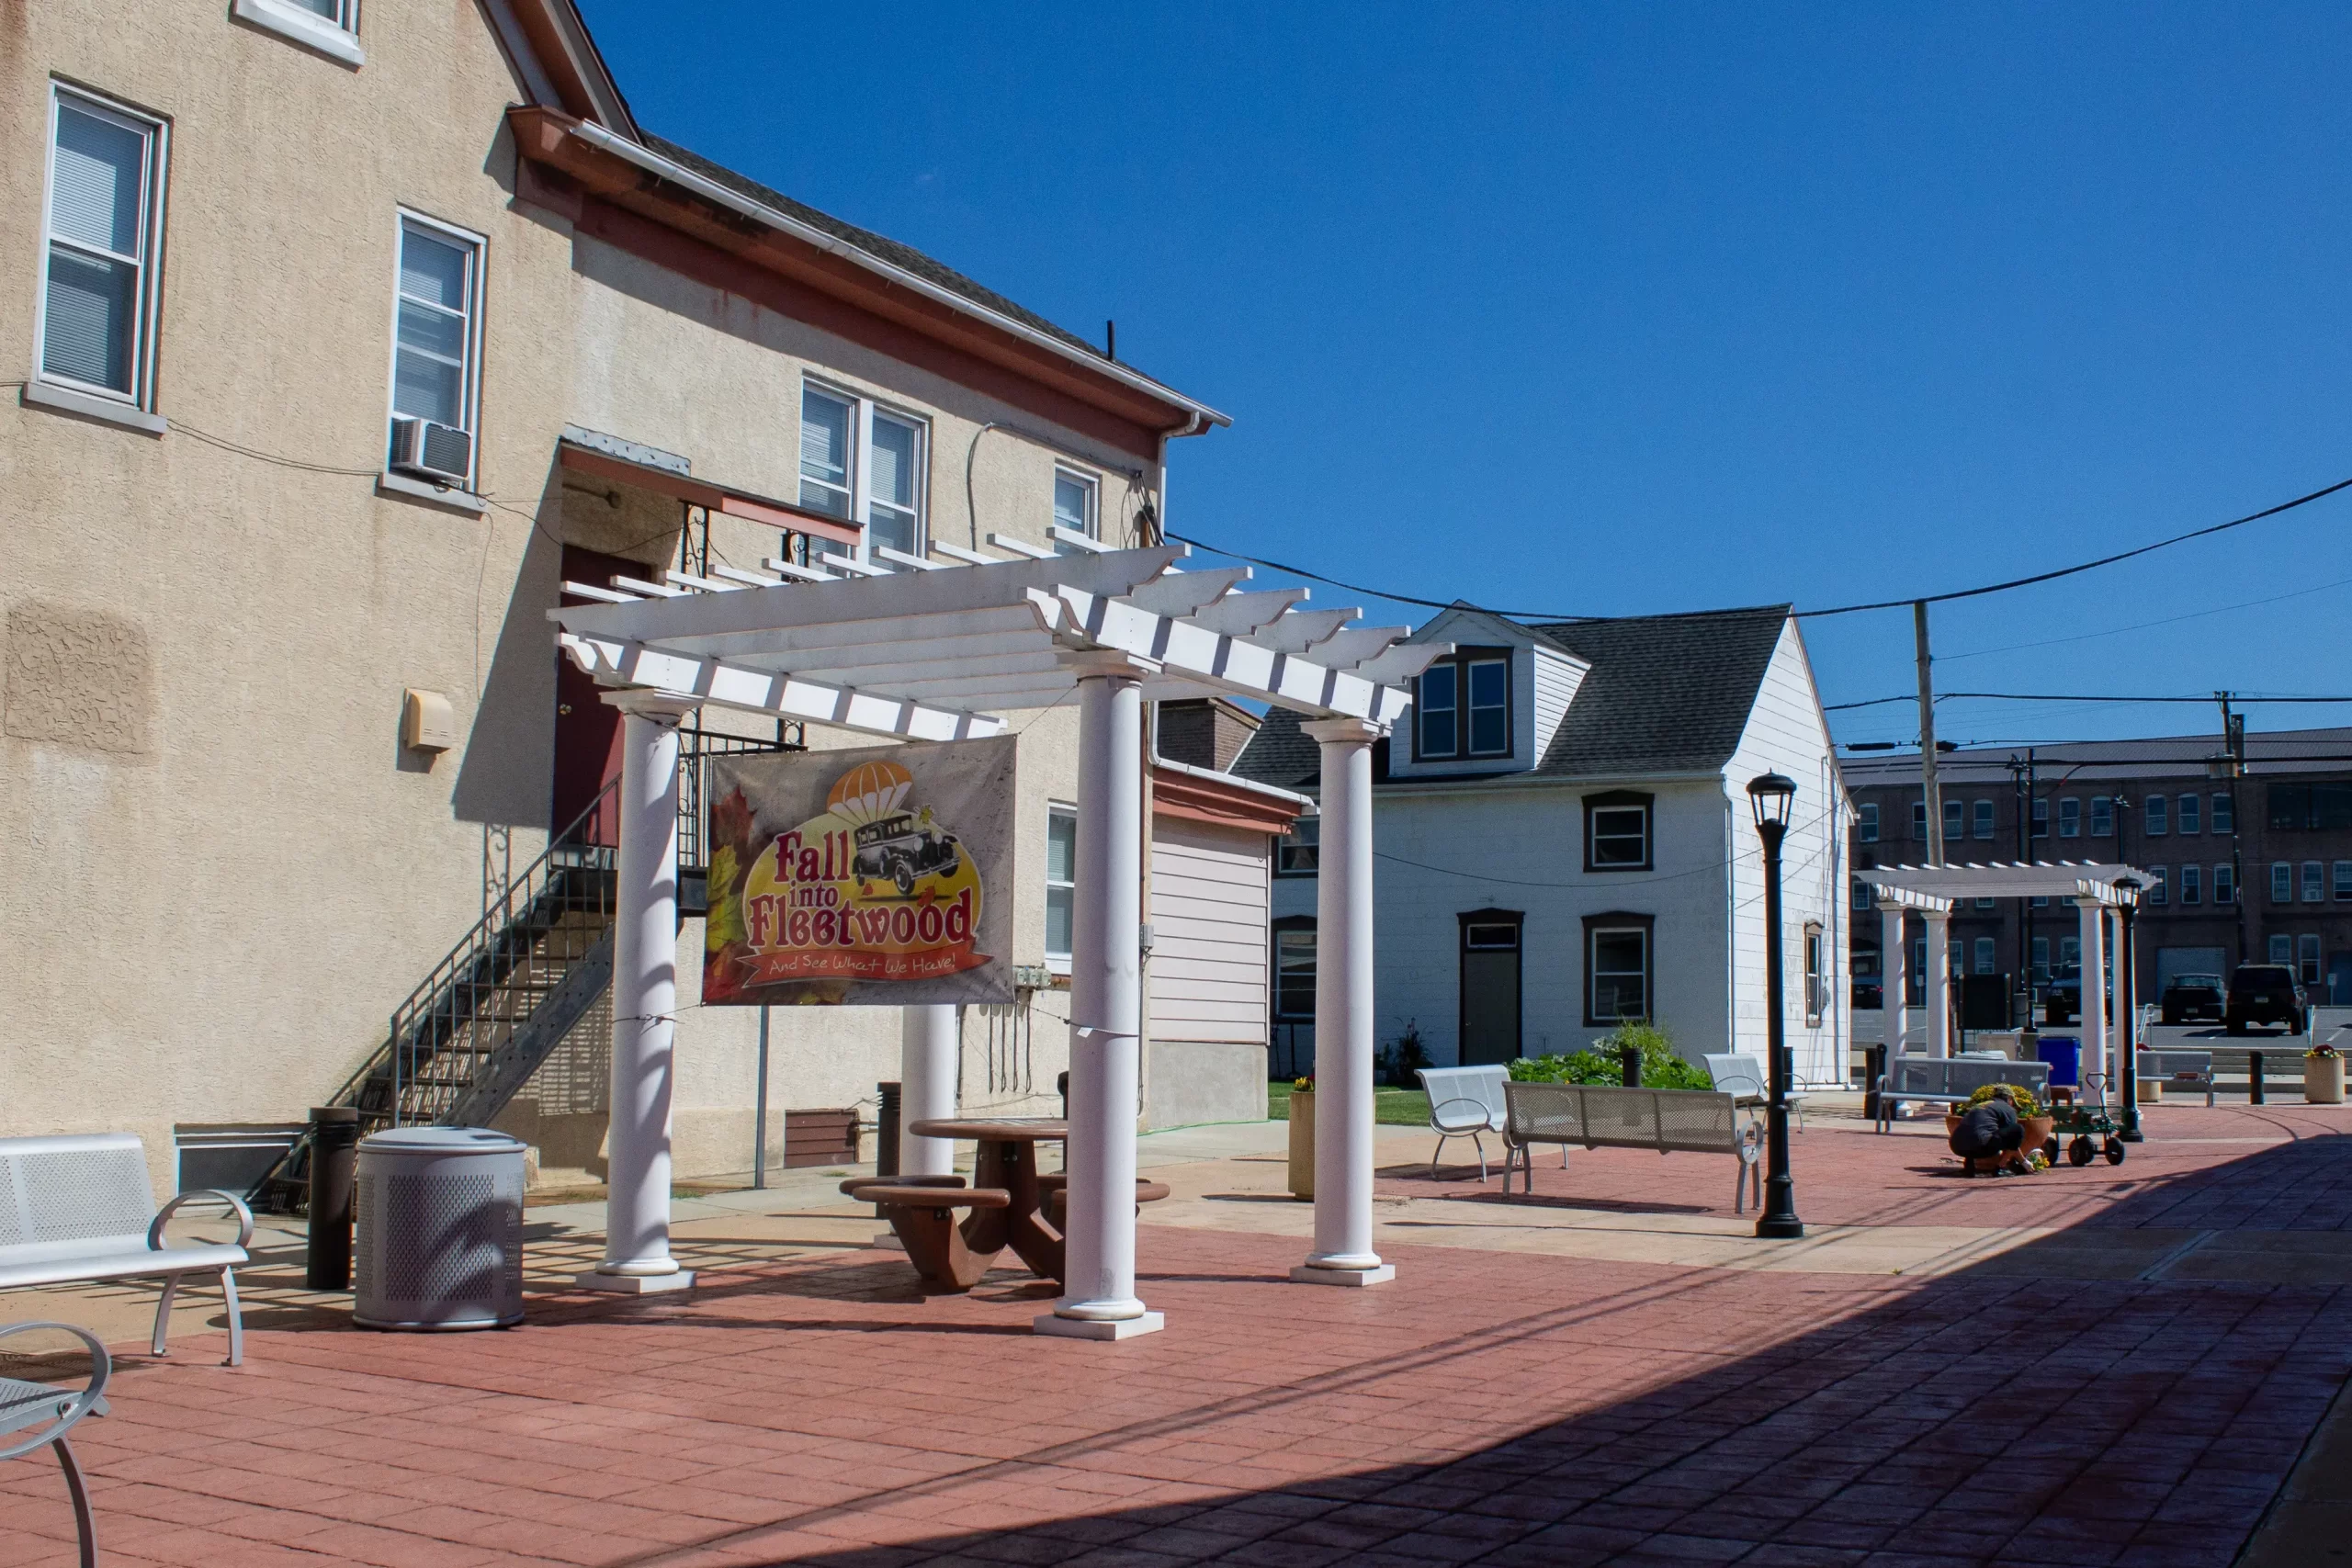 The plaza on Main Street in Fleetwood, with a sign for "Fall into Fleetwood" hanging on the pergola.